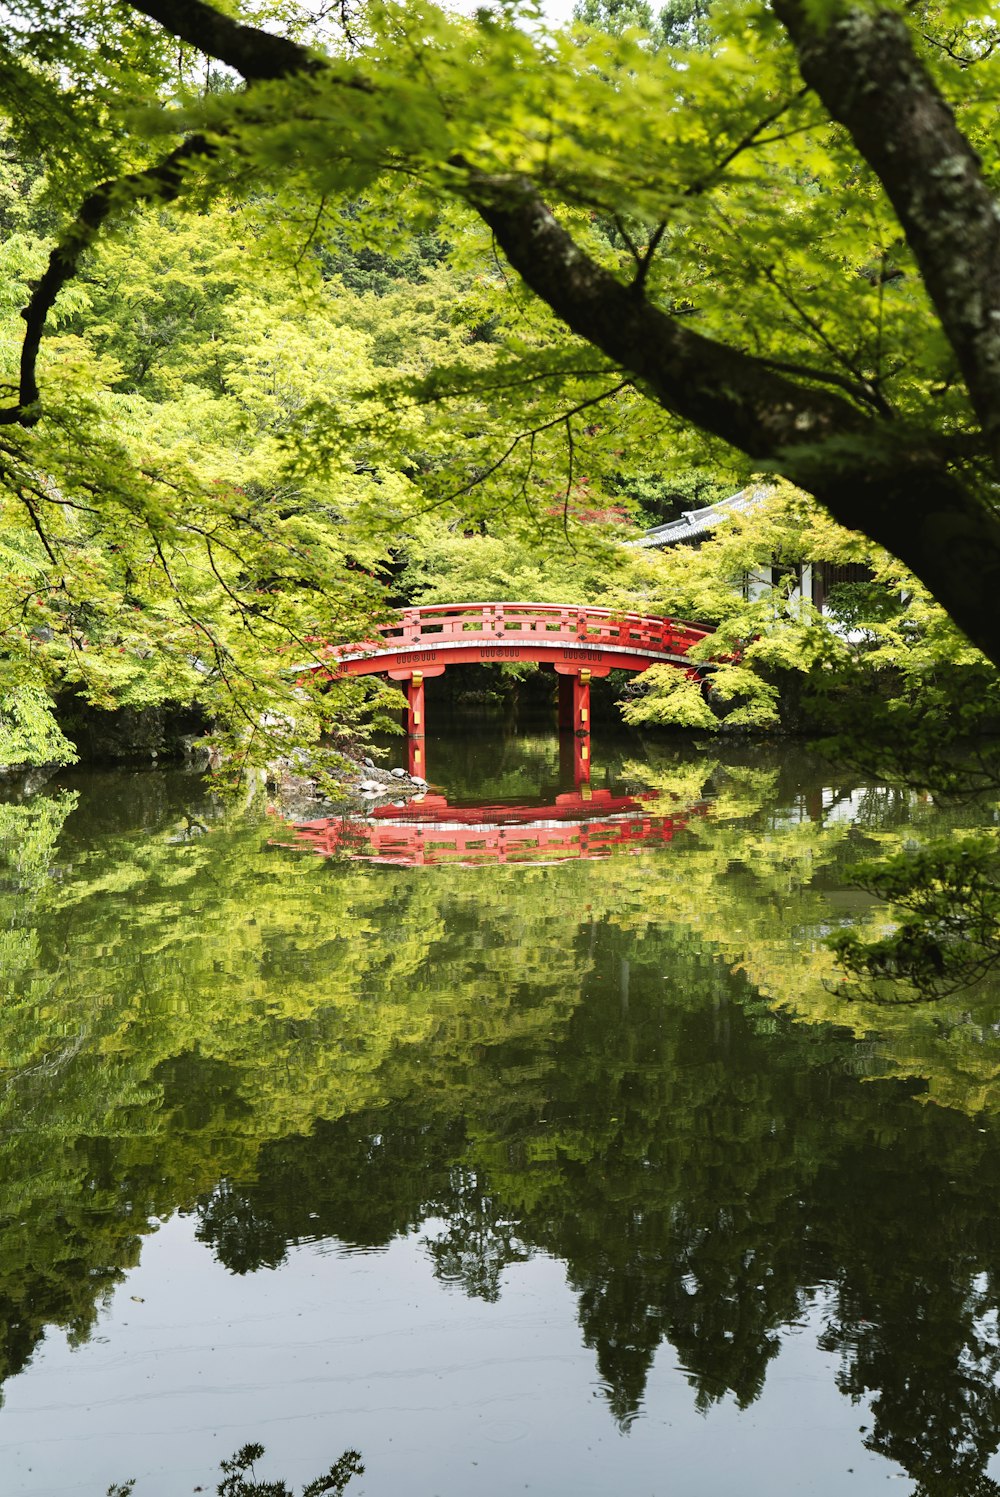 red bridge over body of water near treees